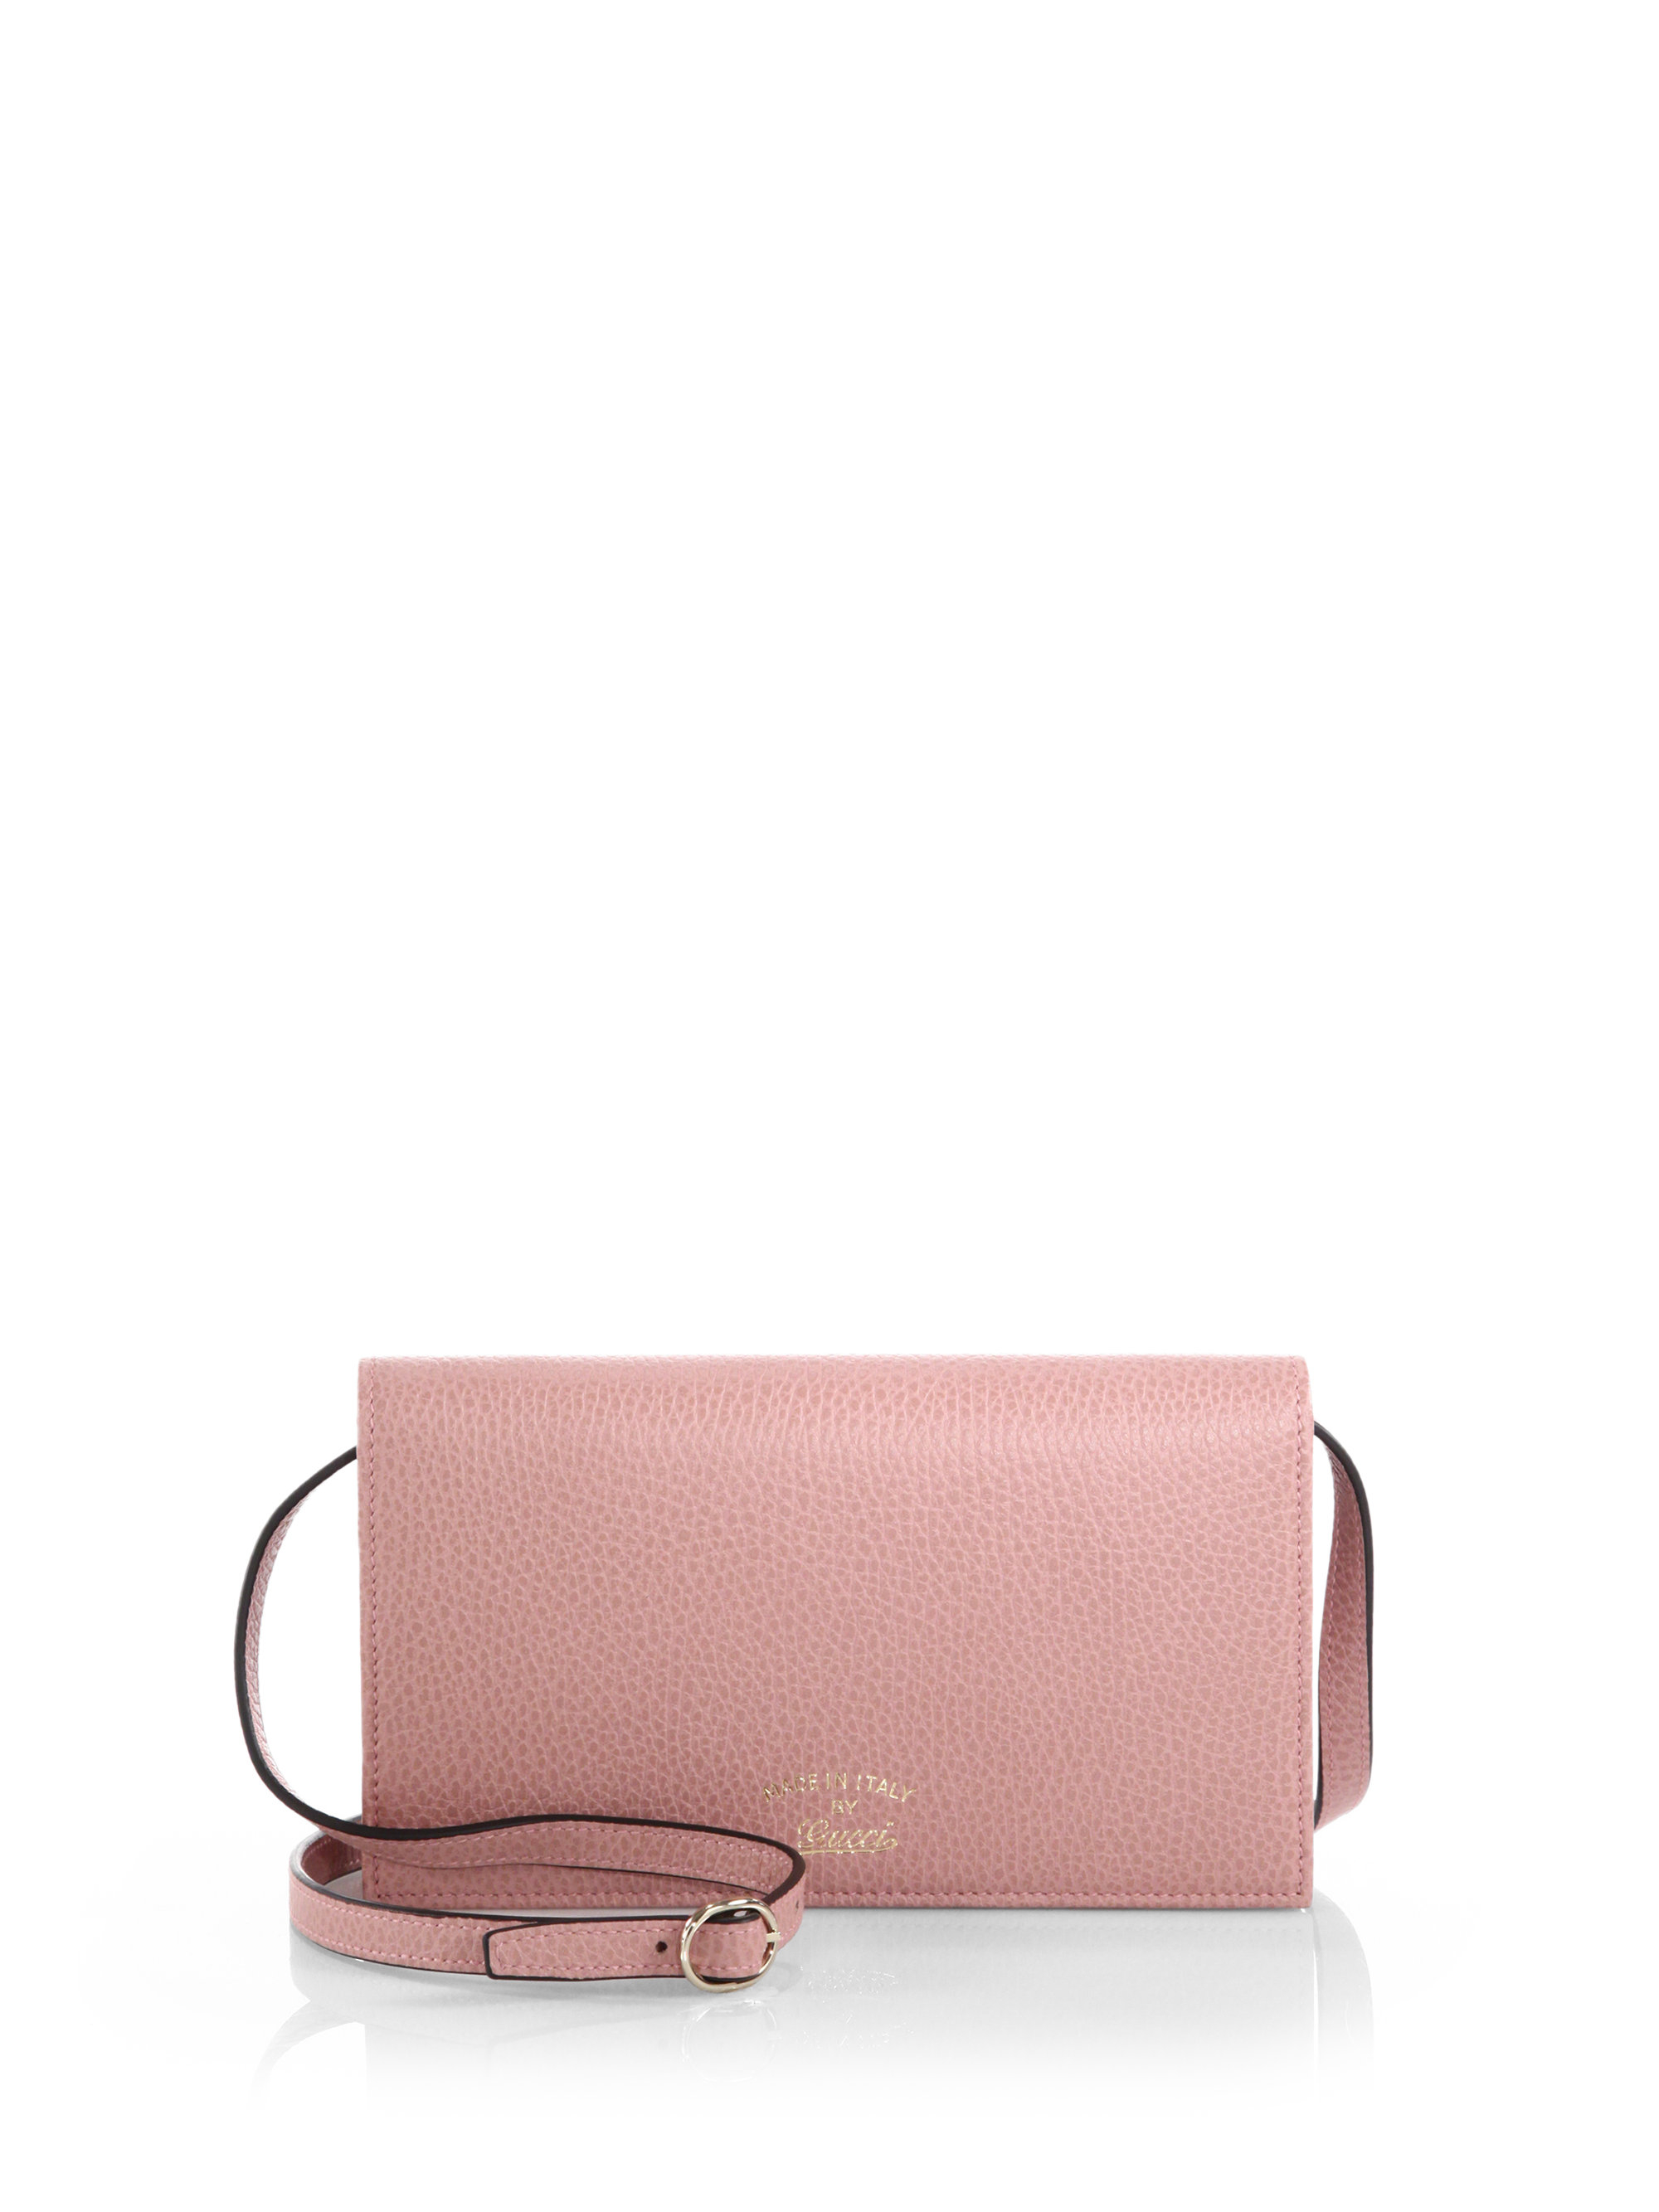 Lyst - Gucci Swing Leather Wallet With Strap in Pink